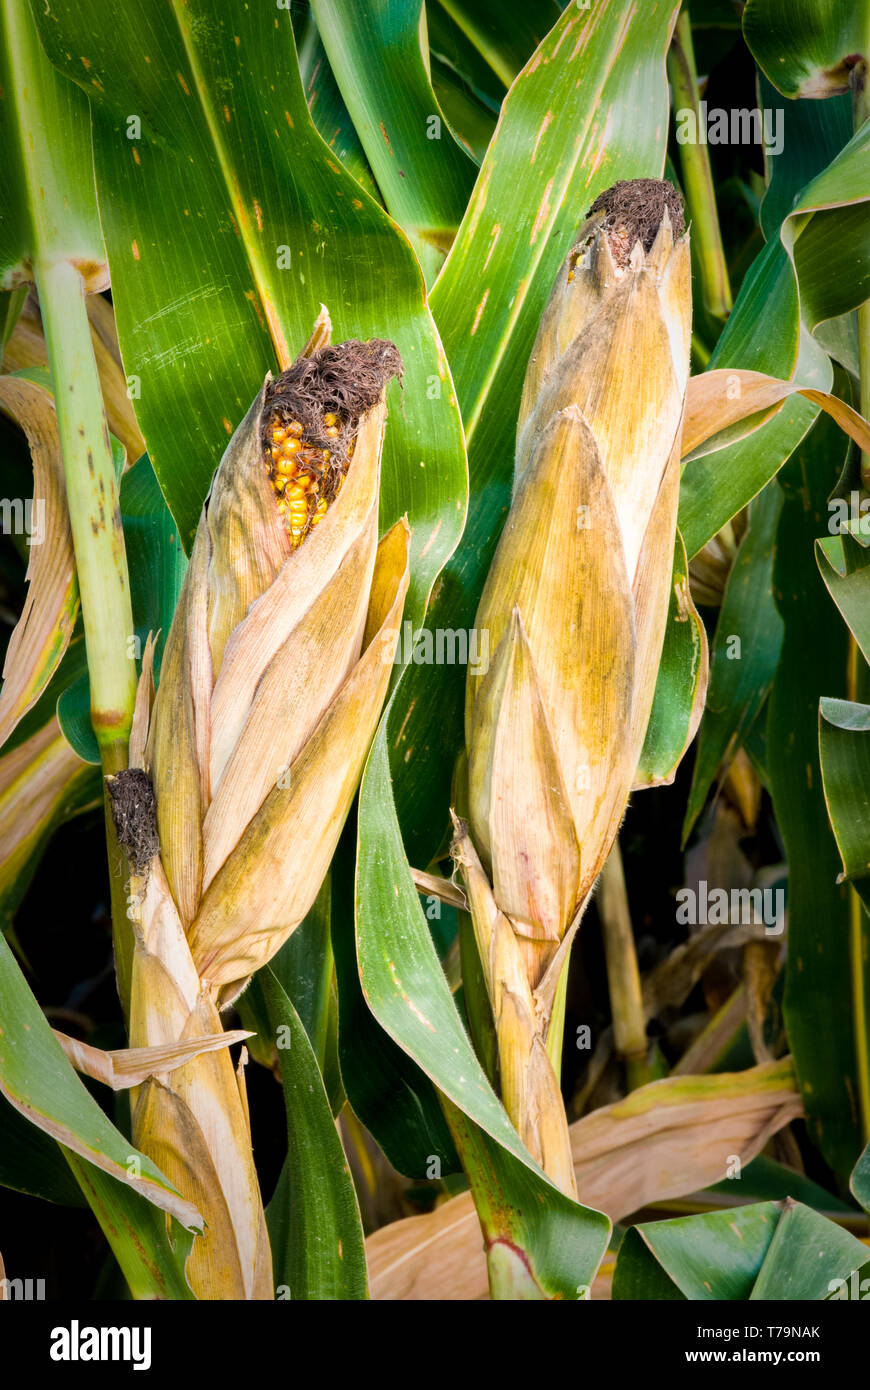 Close up of a farmers crop consisting of two ears of corn Stock Photo